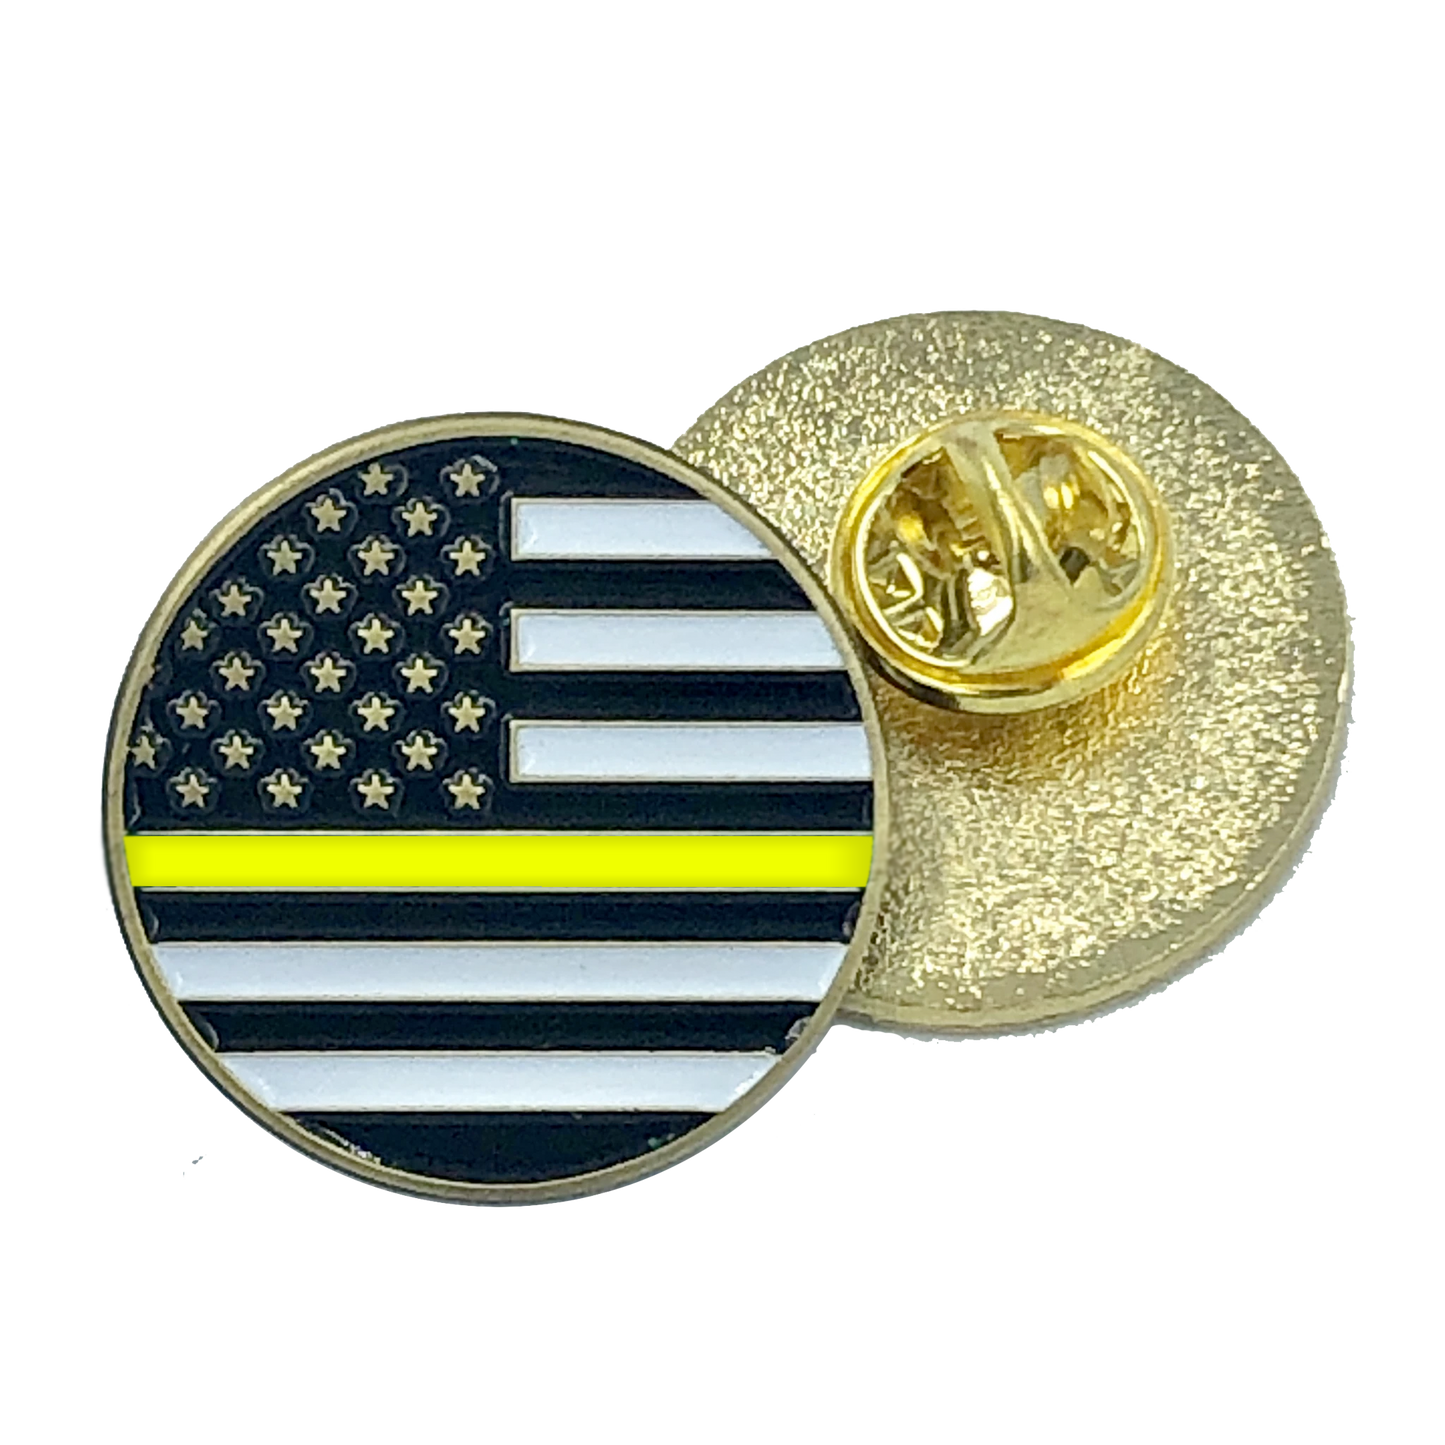 CL-019 Thin Gold Line Line pin american flag yellow 911 Emergency Dispatcher (round)